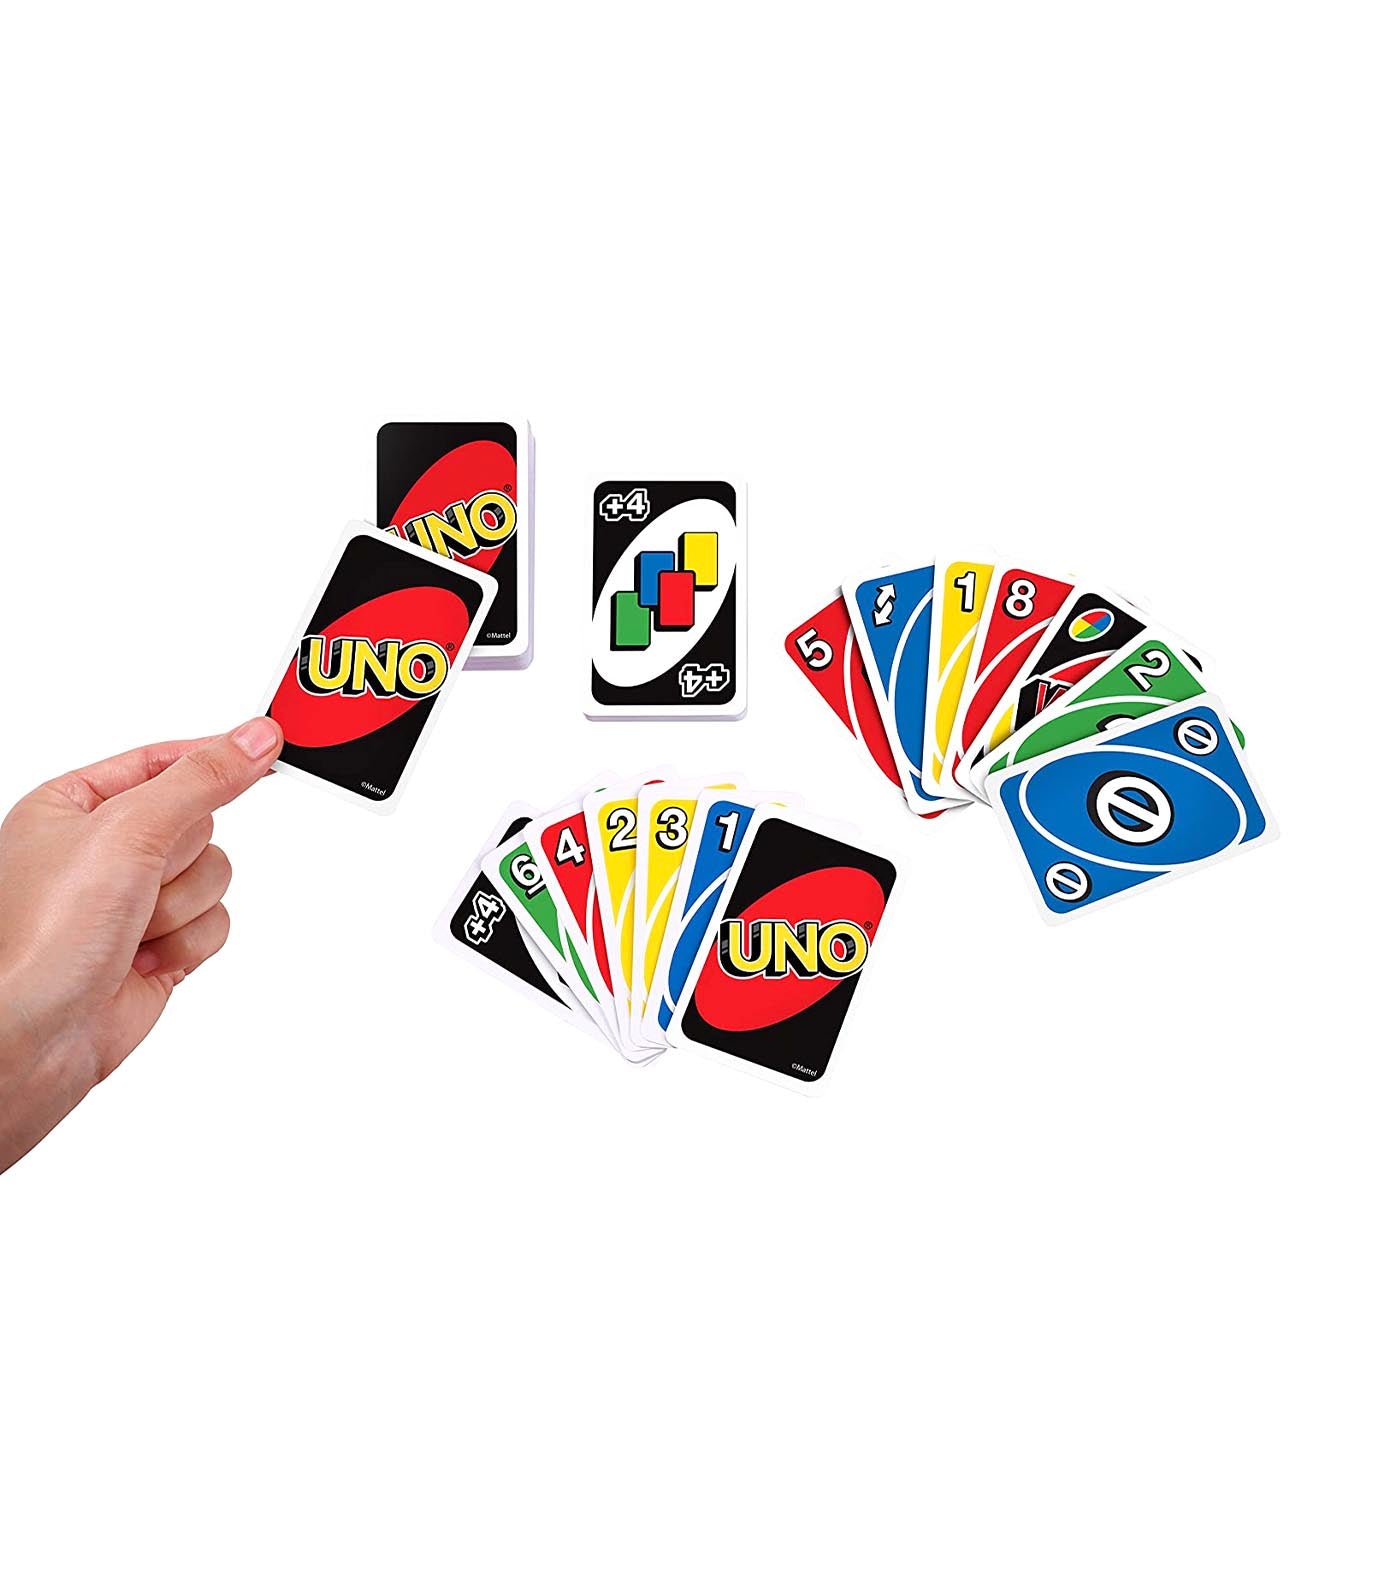 Mattel Games UNO Flex Card Game, Fun Games for Adult and Party Game Night,  2 to 6 Players ( Exclusive)